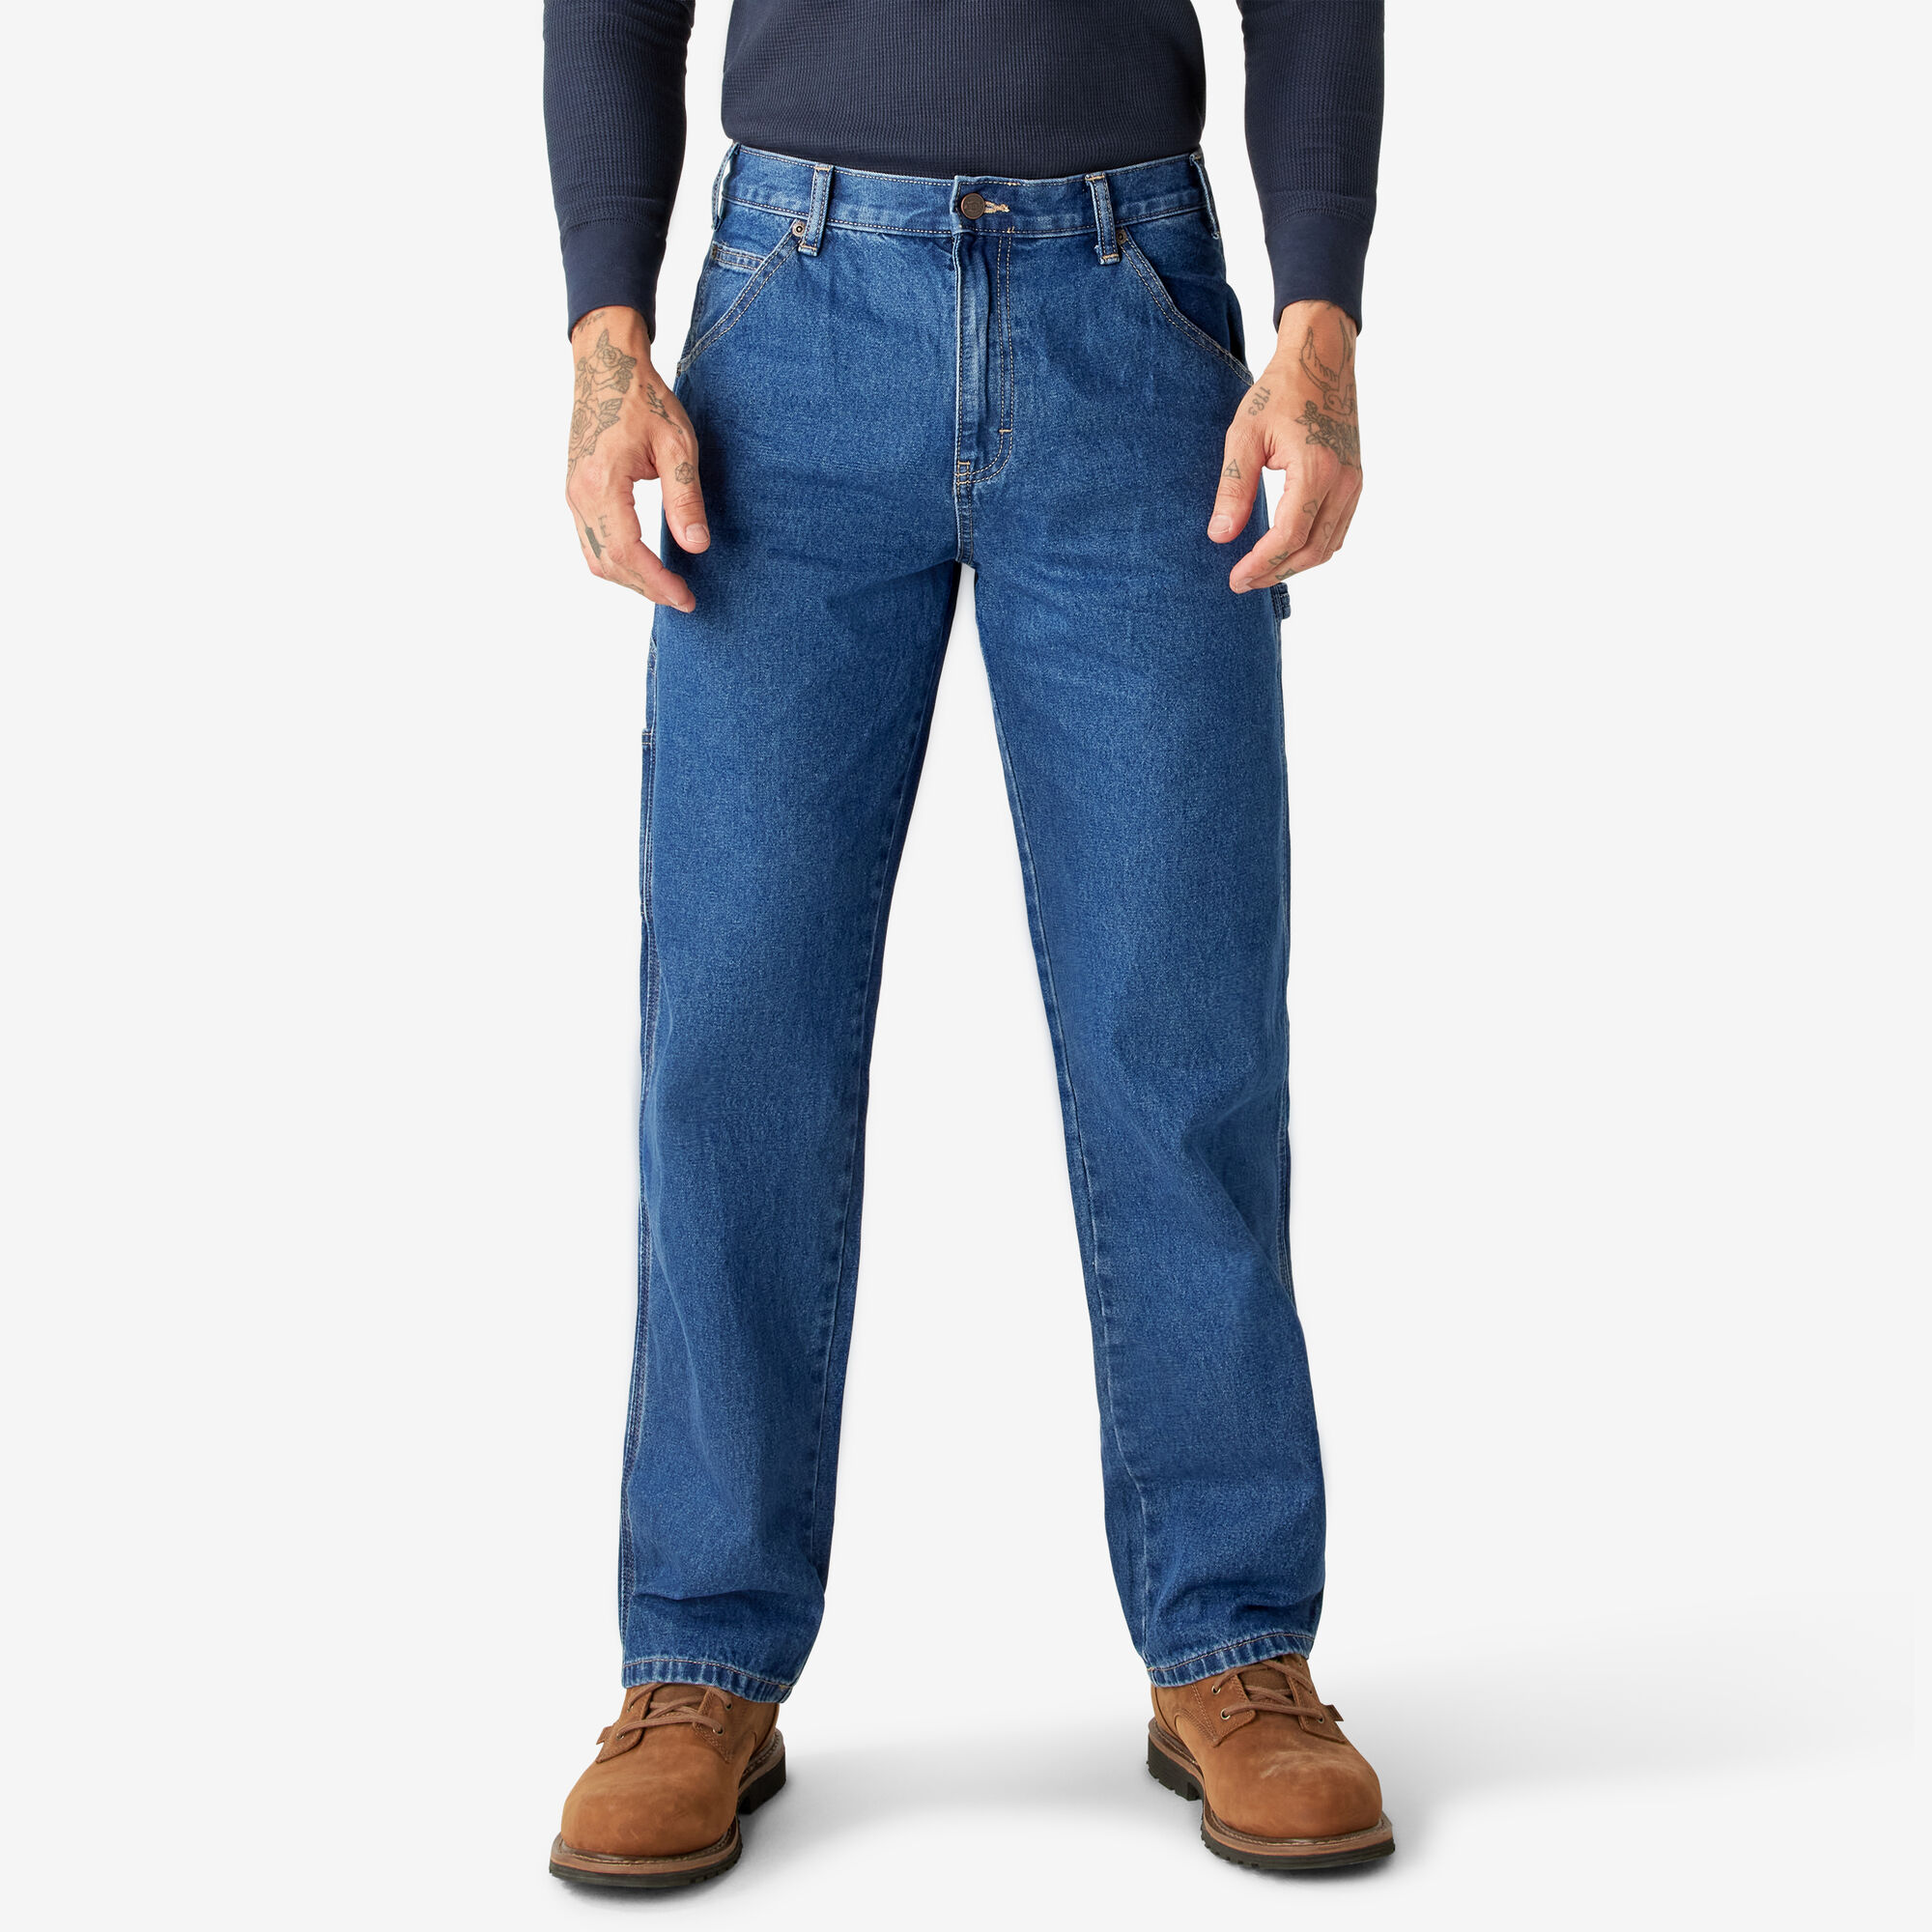 Gezond Botsing Sneeuwwitje Relaxed Fit Carpenter Jeans | Mens Jeans | Dickies